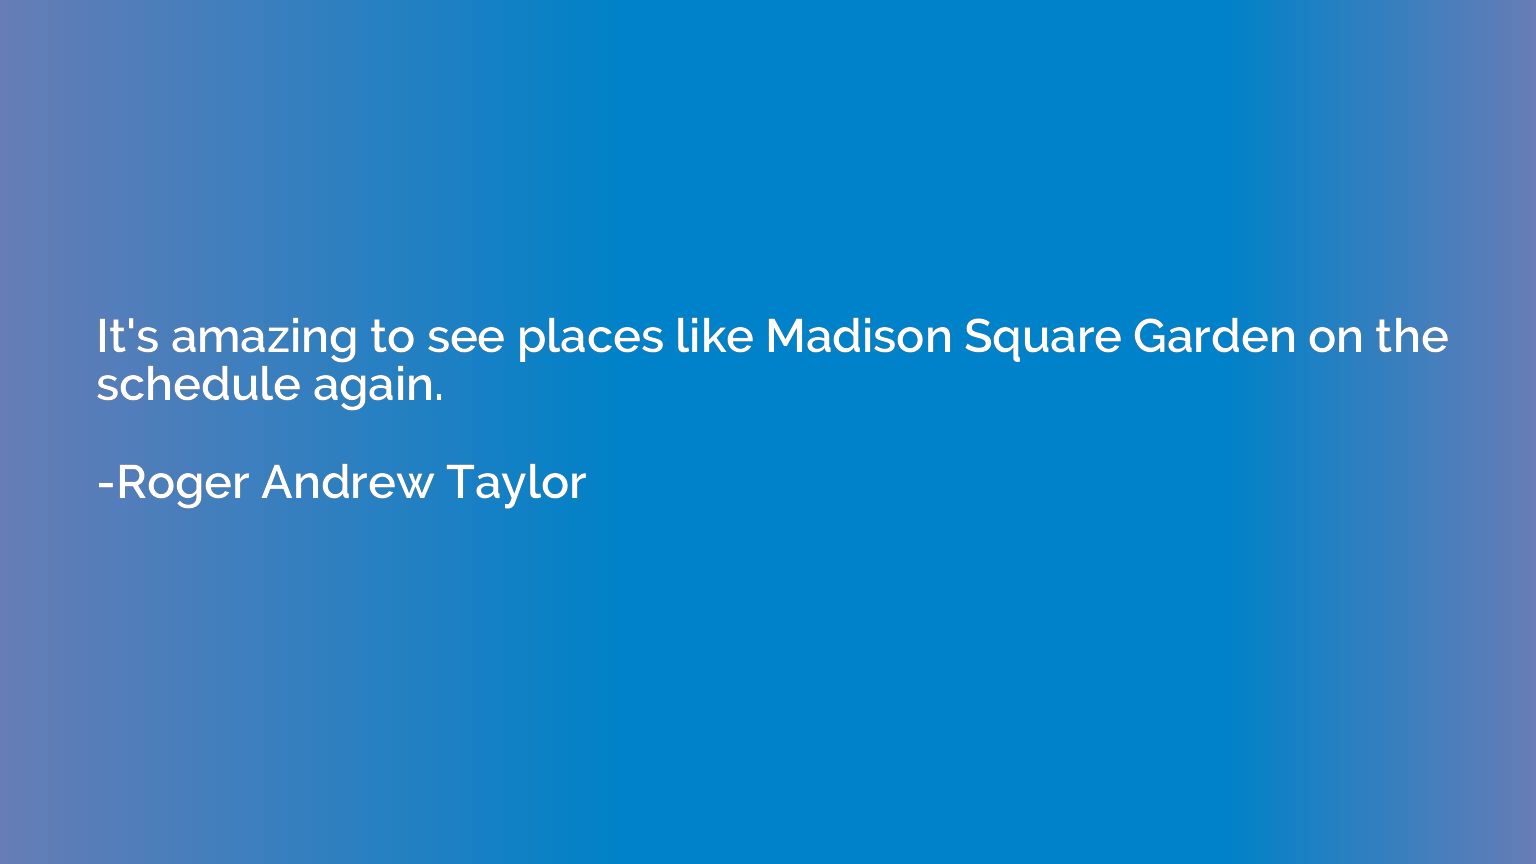 It's amazing to see places like Madison Square Garden on the